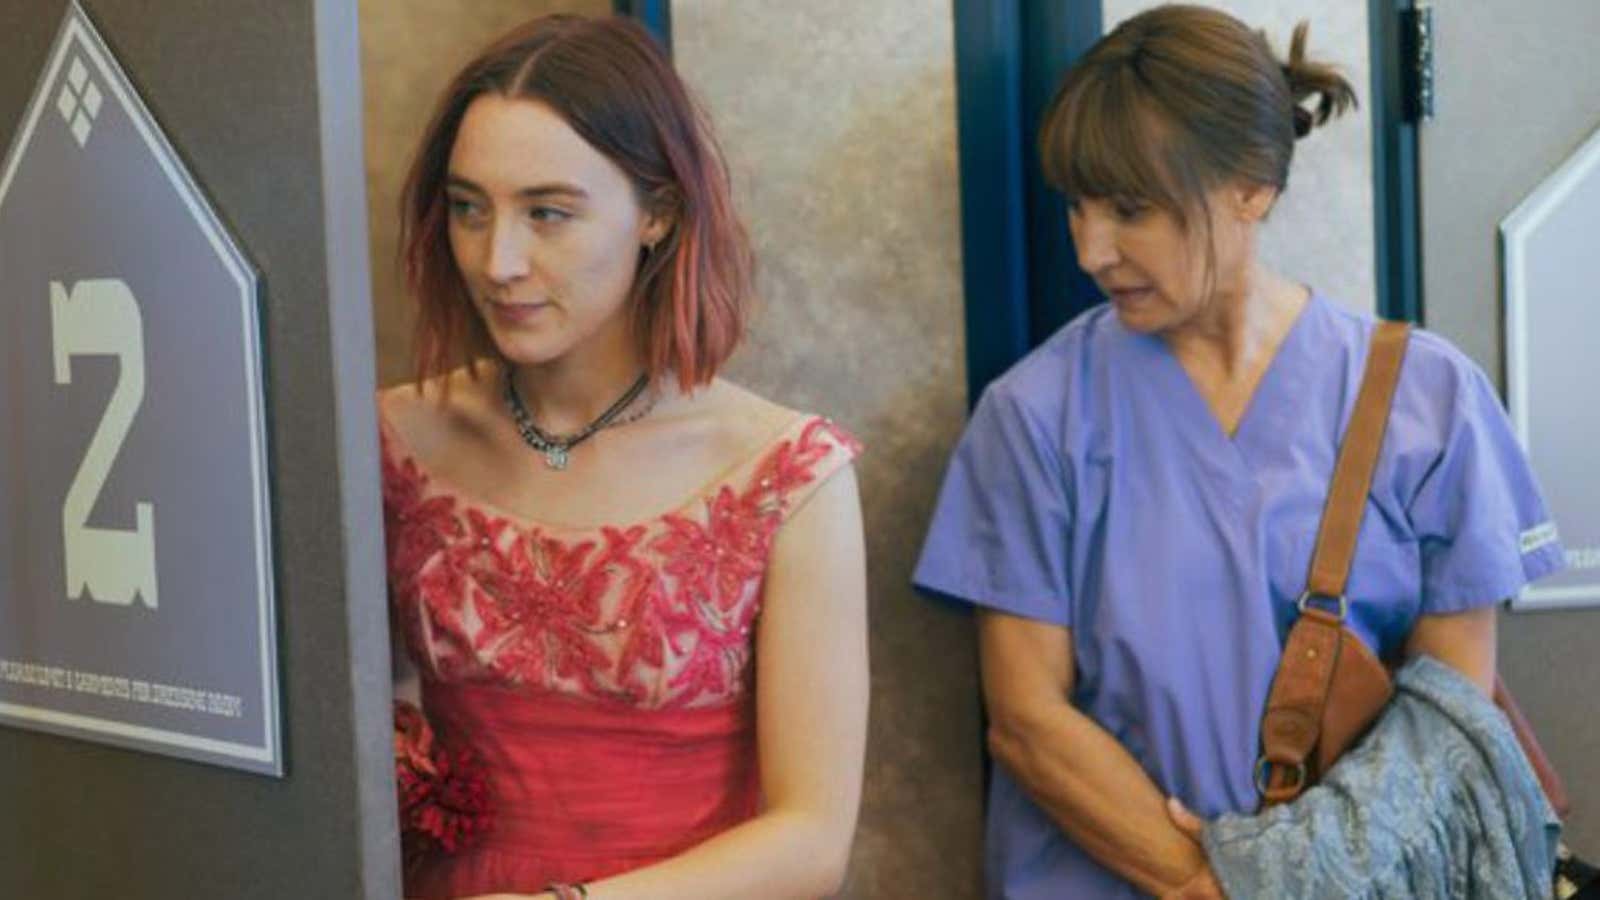 Saoirse Ronan and Laurie Metcalf are the ladies of “Lady Bird”.